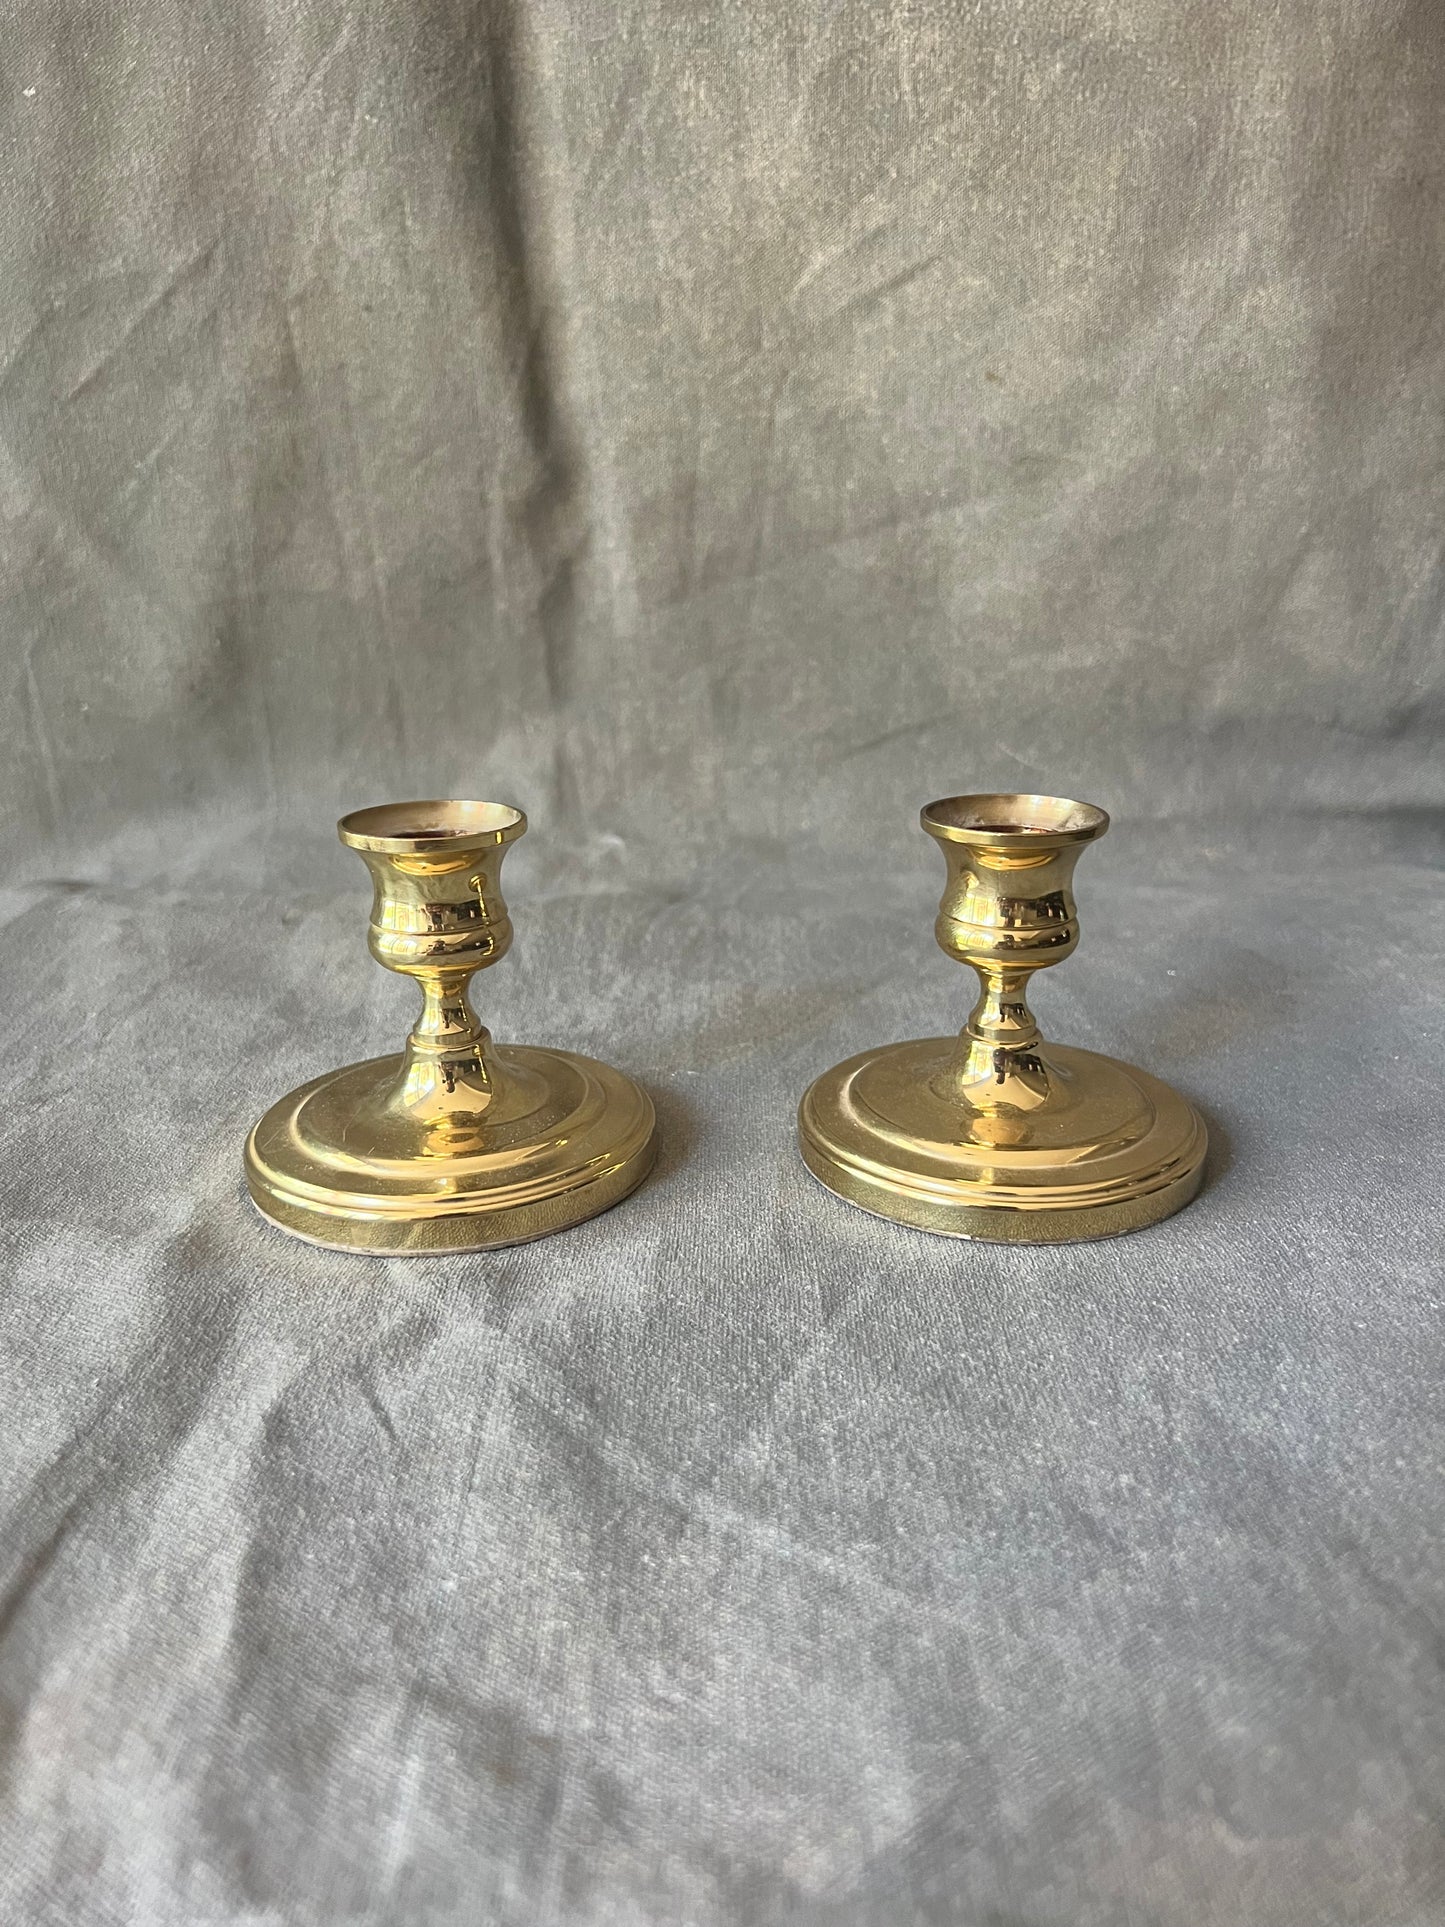 Pair of Vintage Solid Brass Short Candle Holders From Baldwin